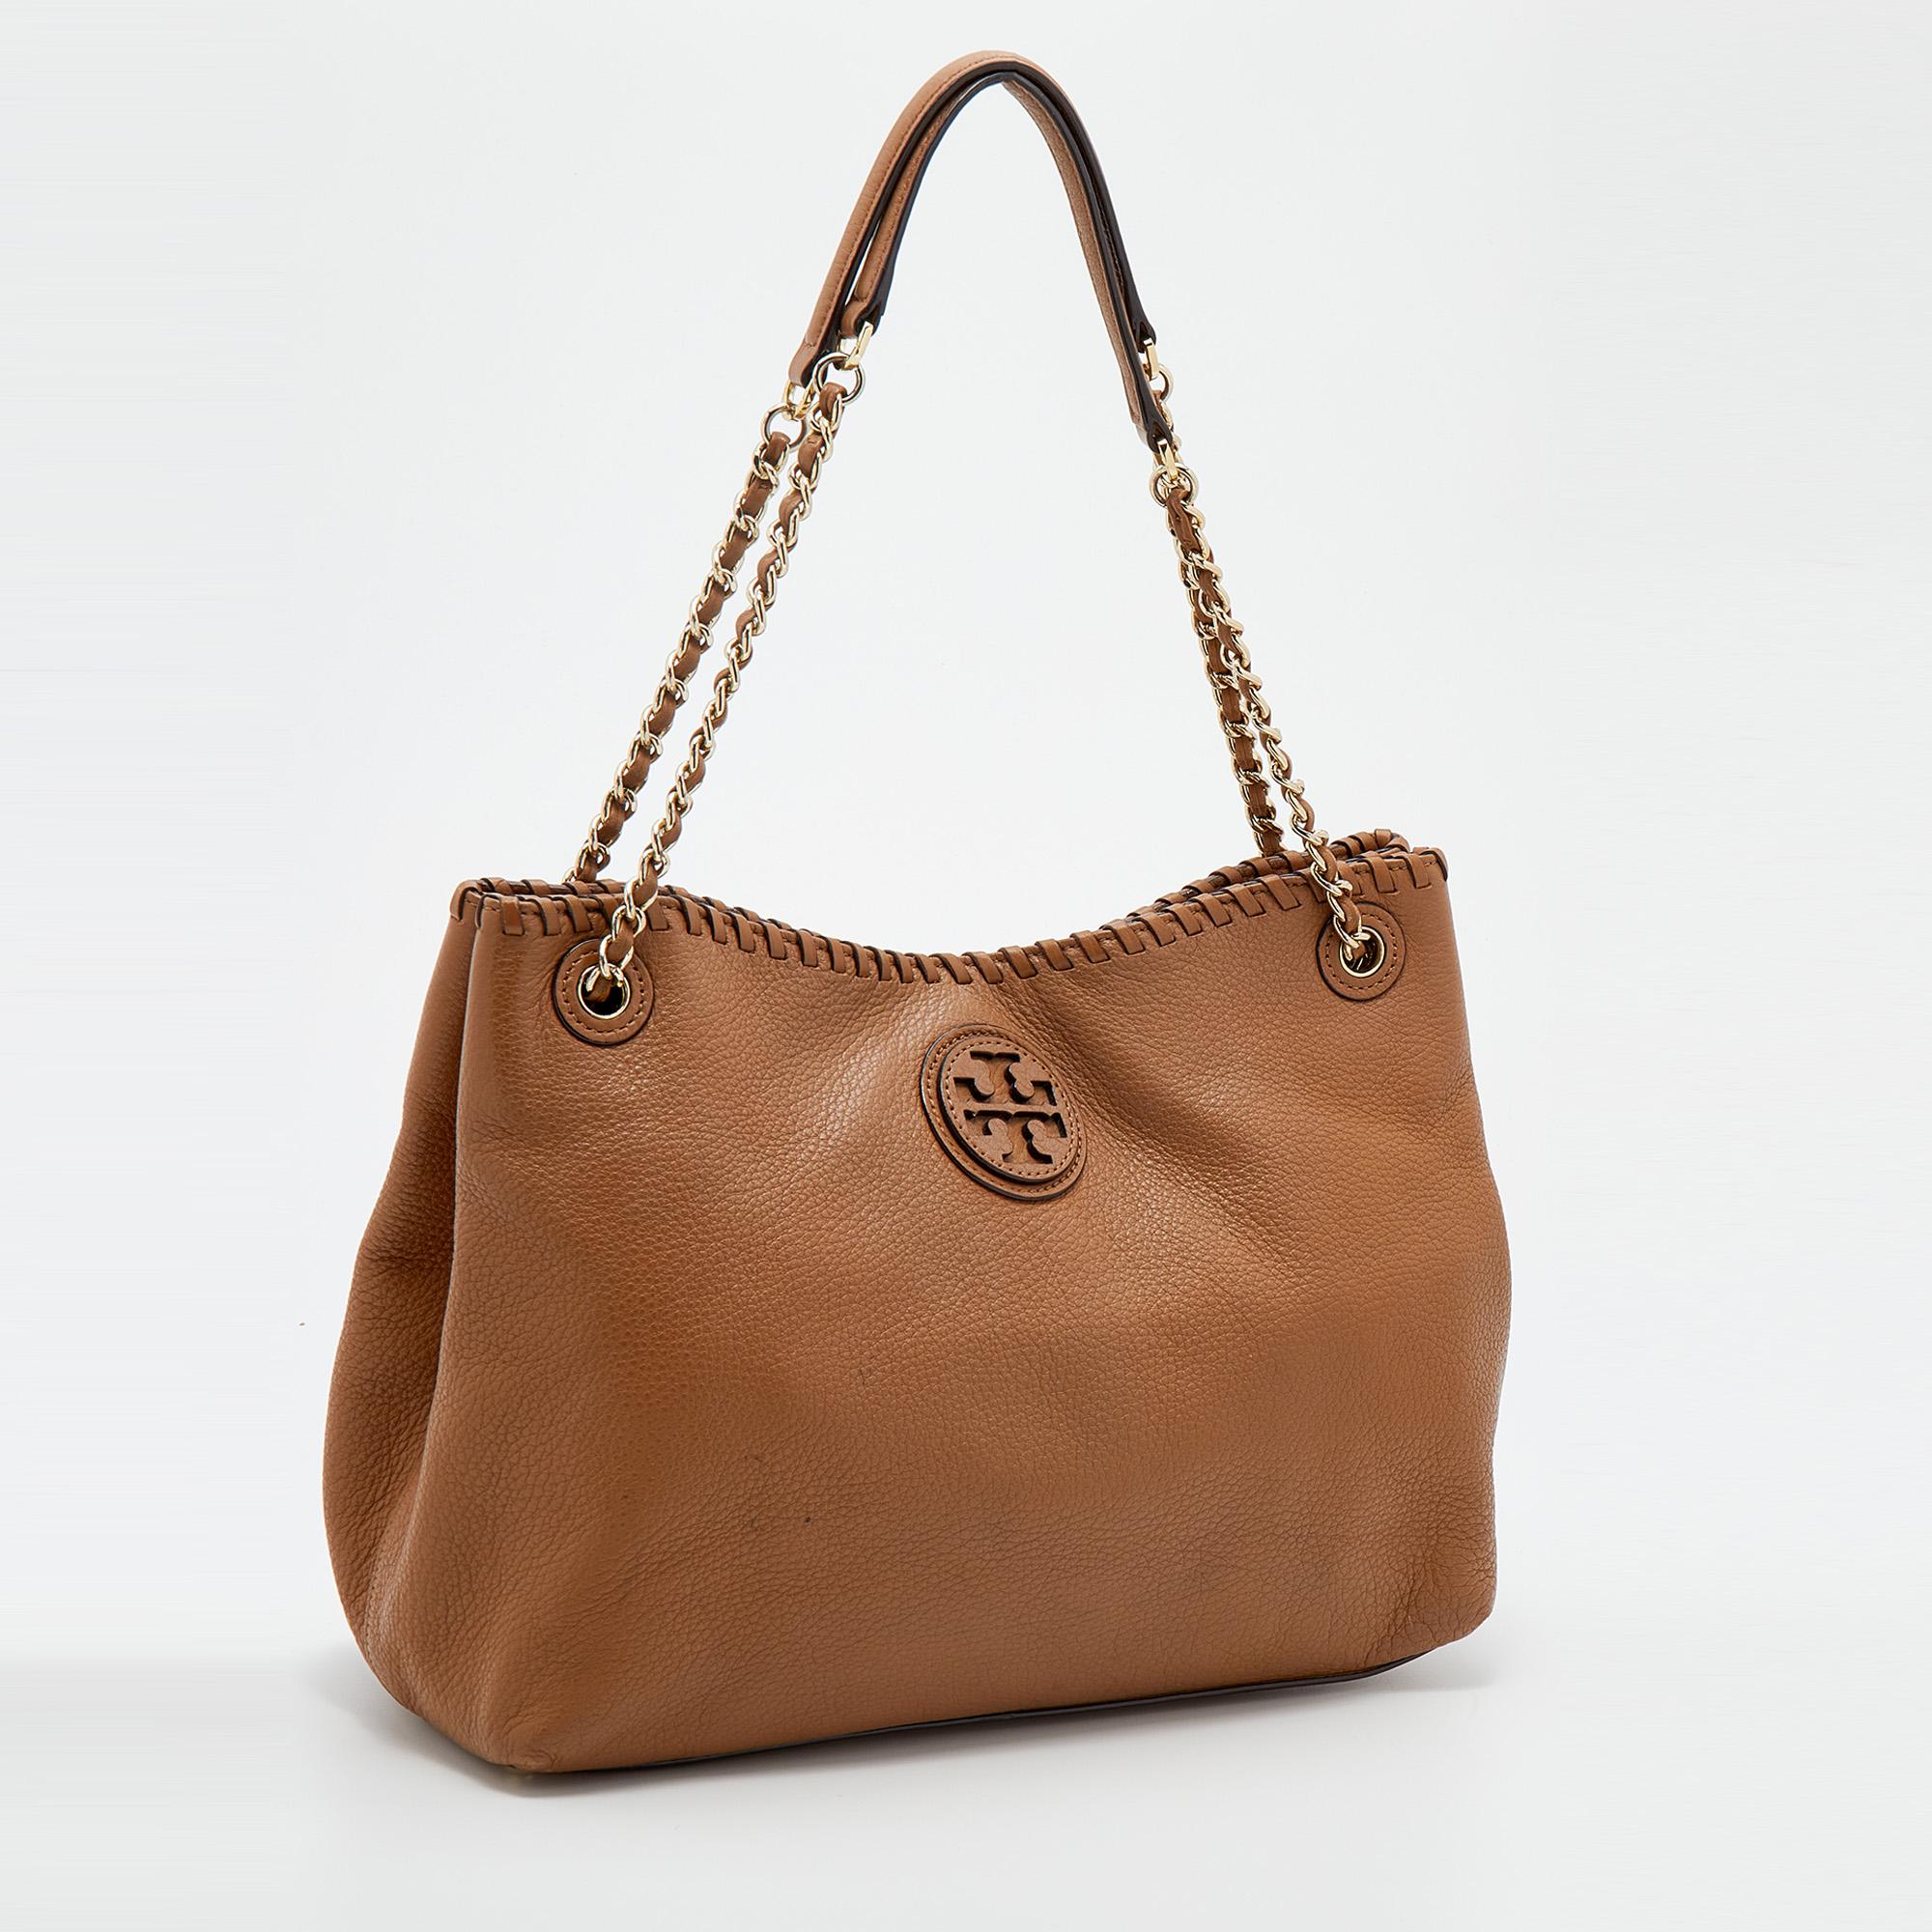 Tory Burch Tan Leather Whipstitch Marion Tote 4